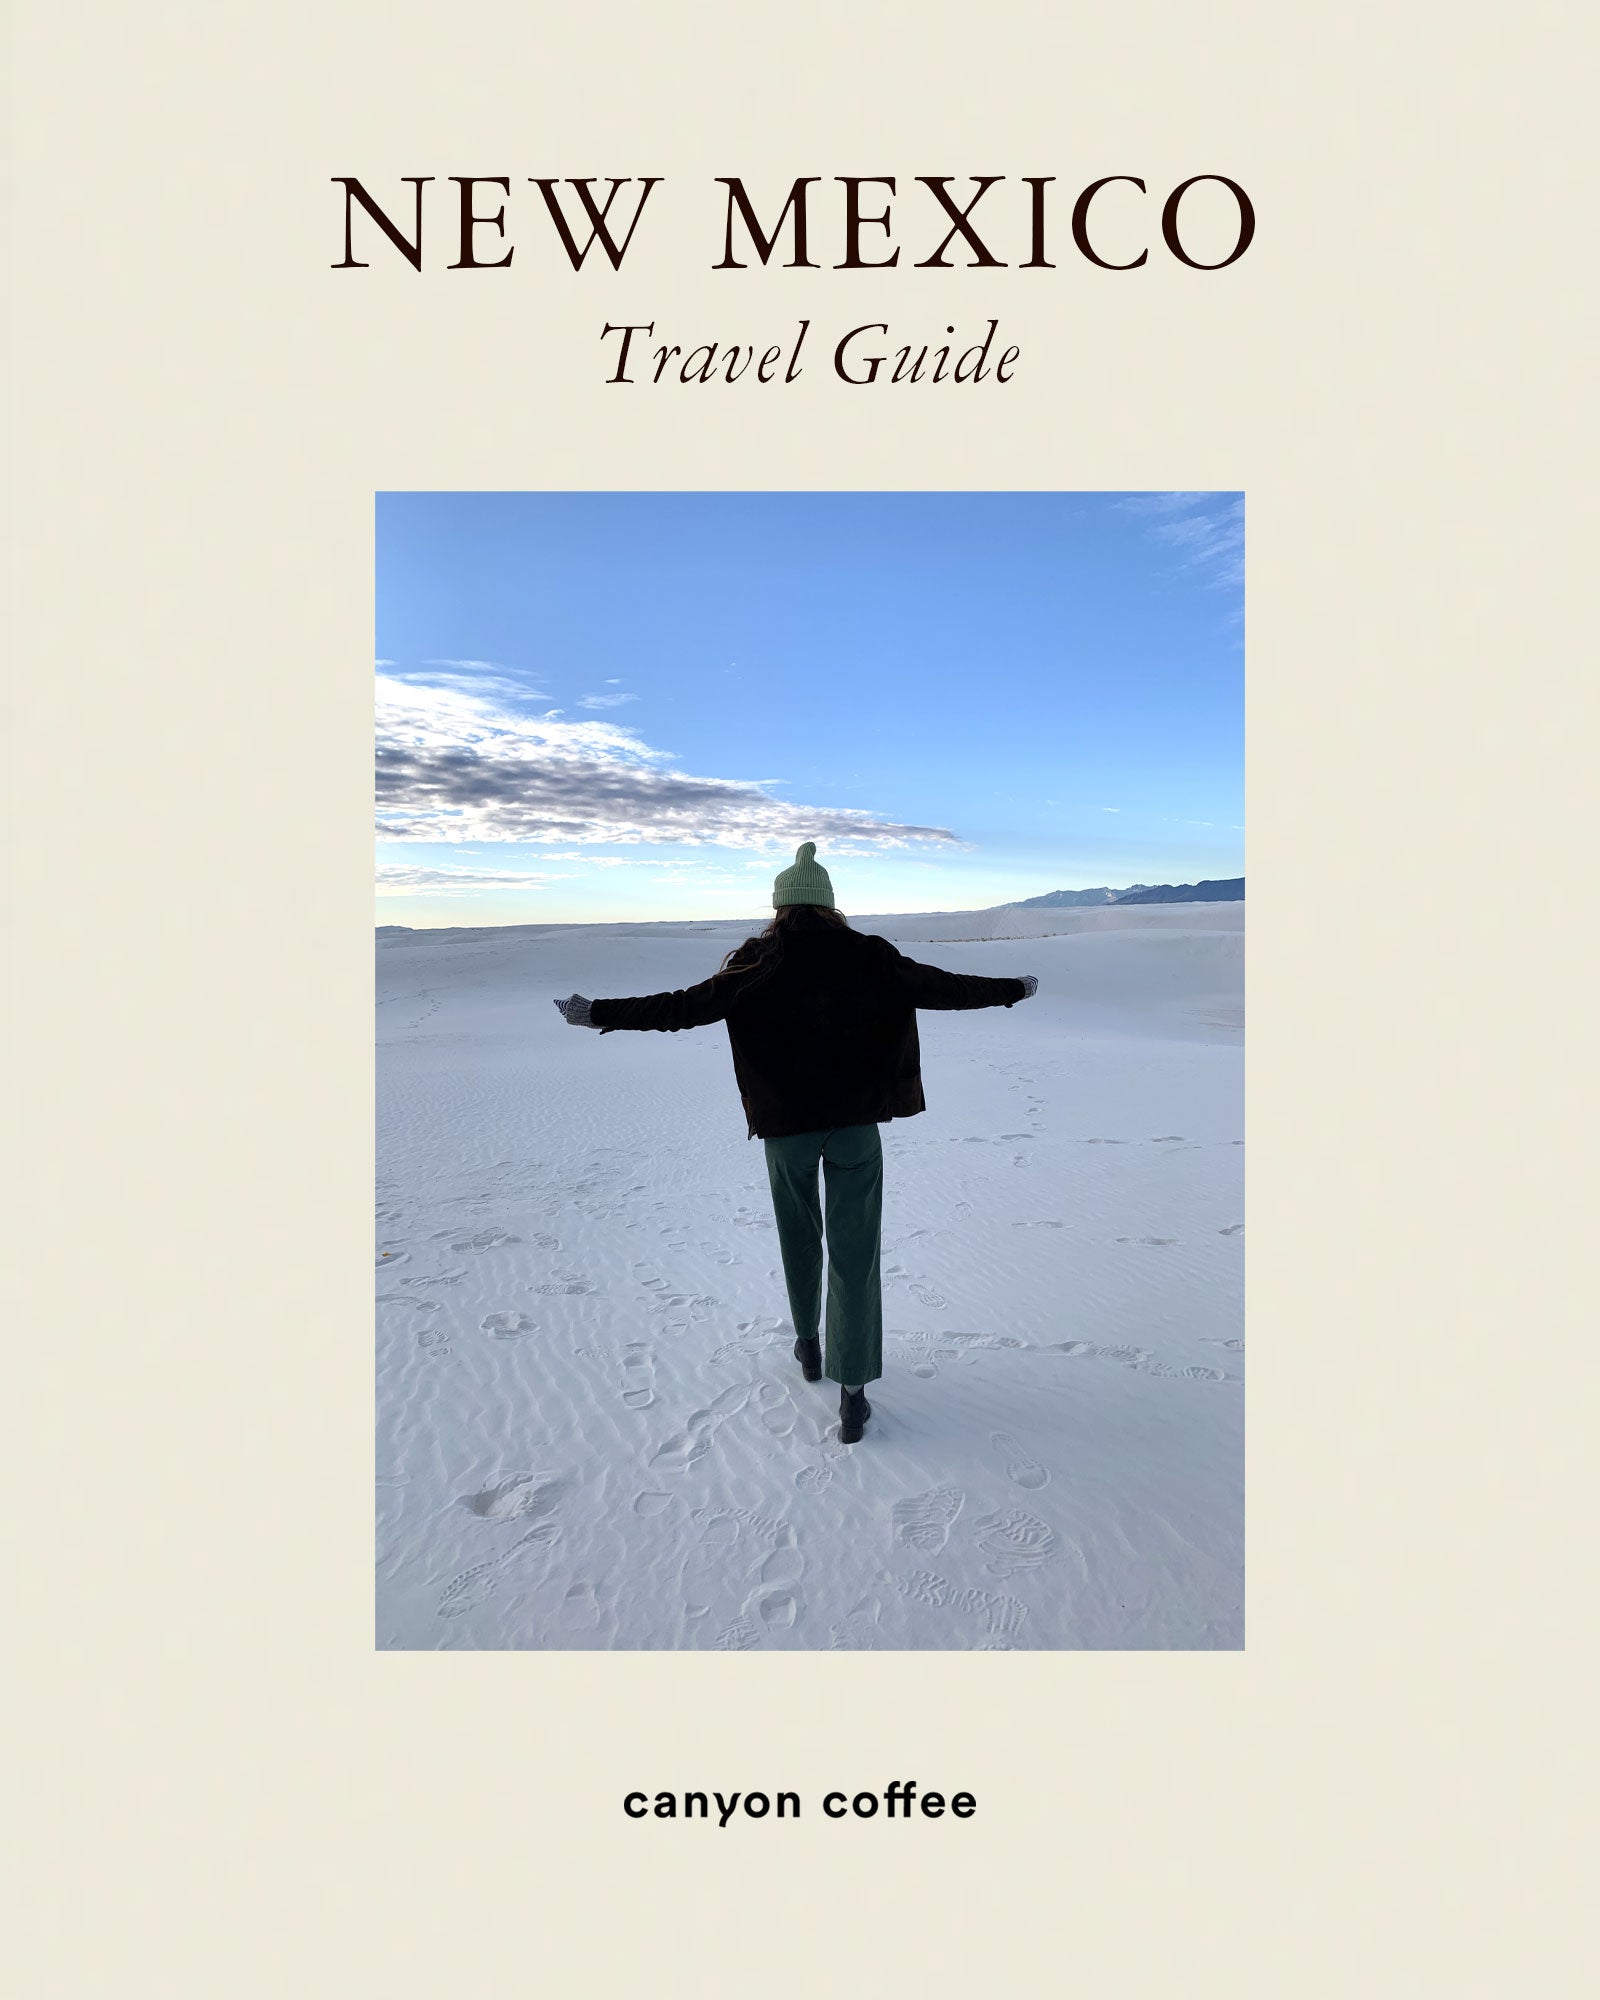 Canyon Coffee Travel Guide New Mexico